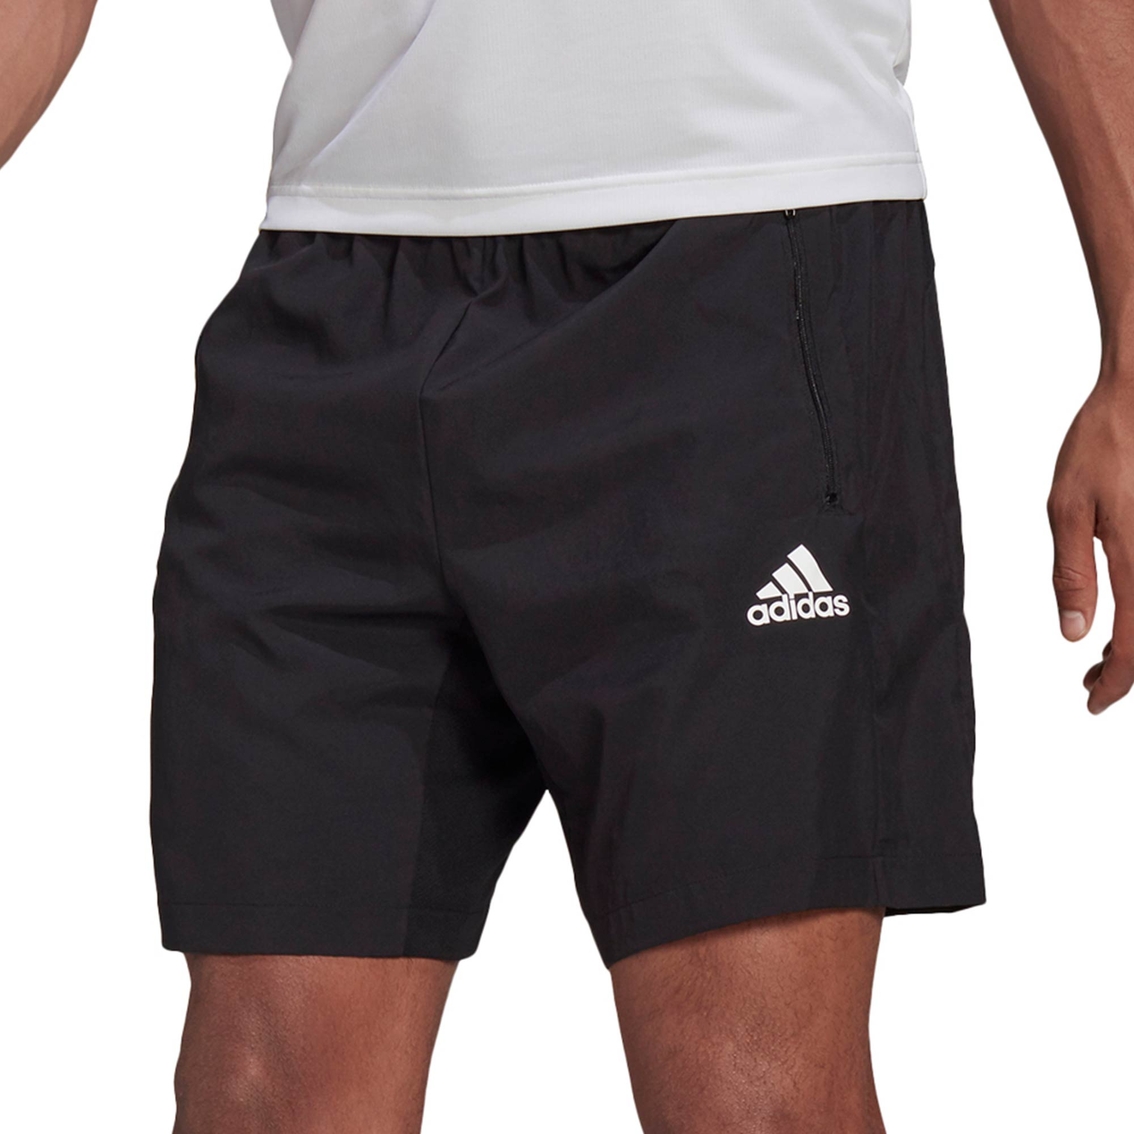 Adidas Design 2 Move Woven Shorts | Shorts | Clothing & Accessories ...